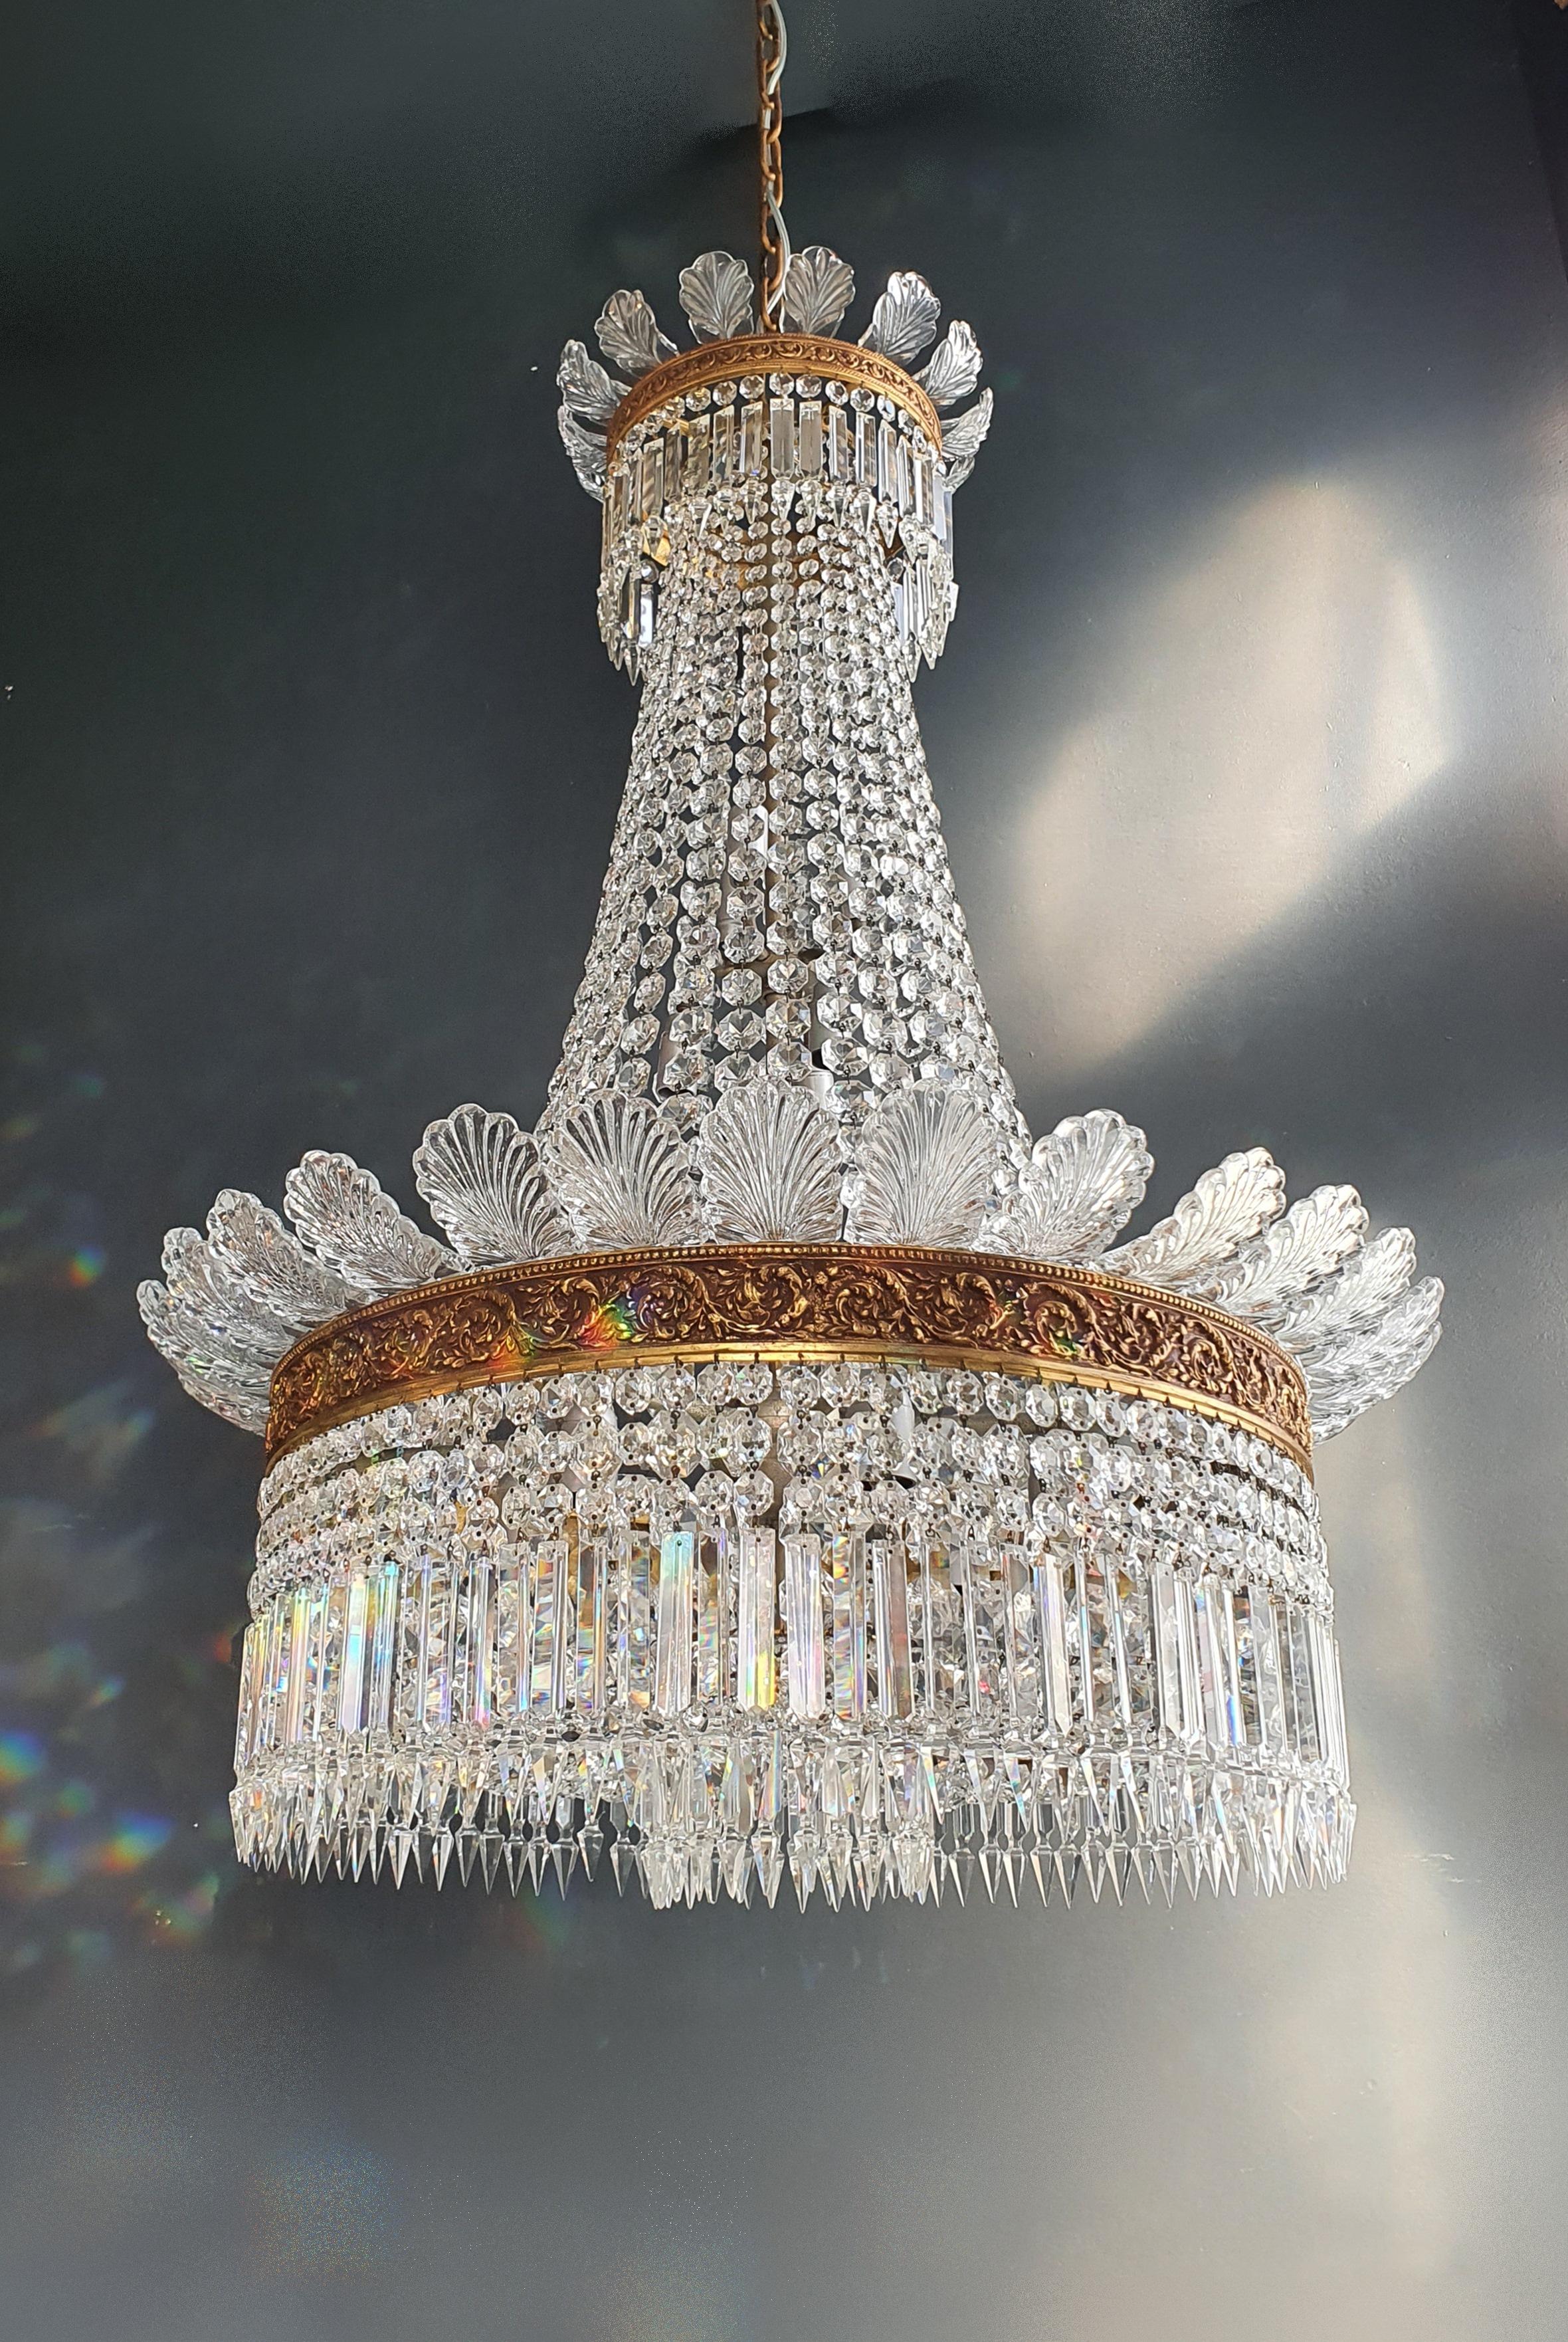 Hand-Knotted Basket Chandelier Crystal Empire Brass Sac a Pearl Lustre Ceiling Antique